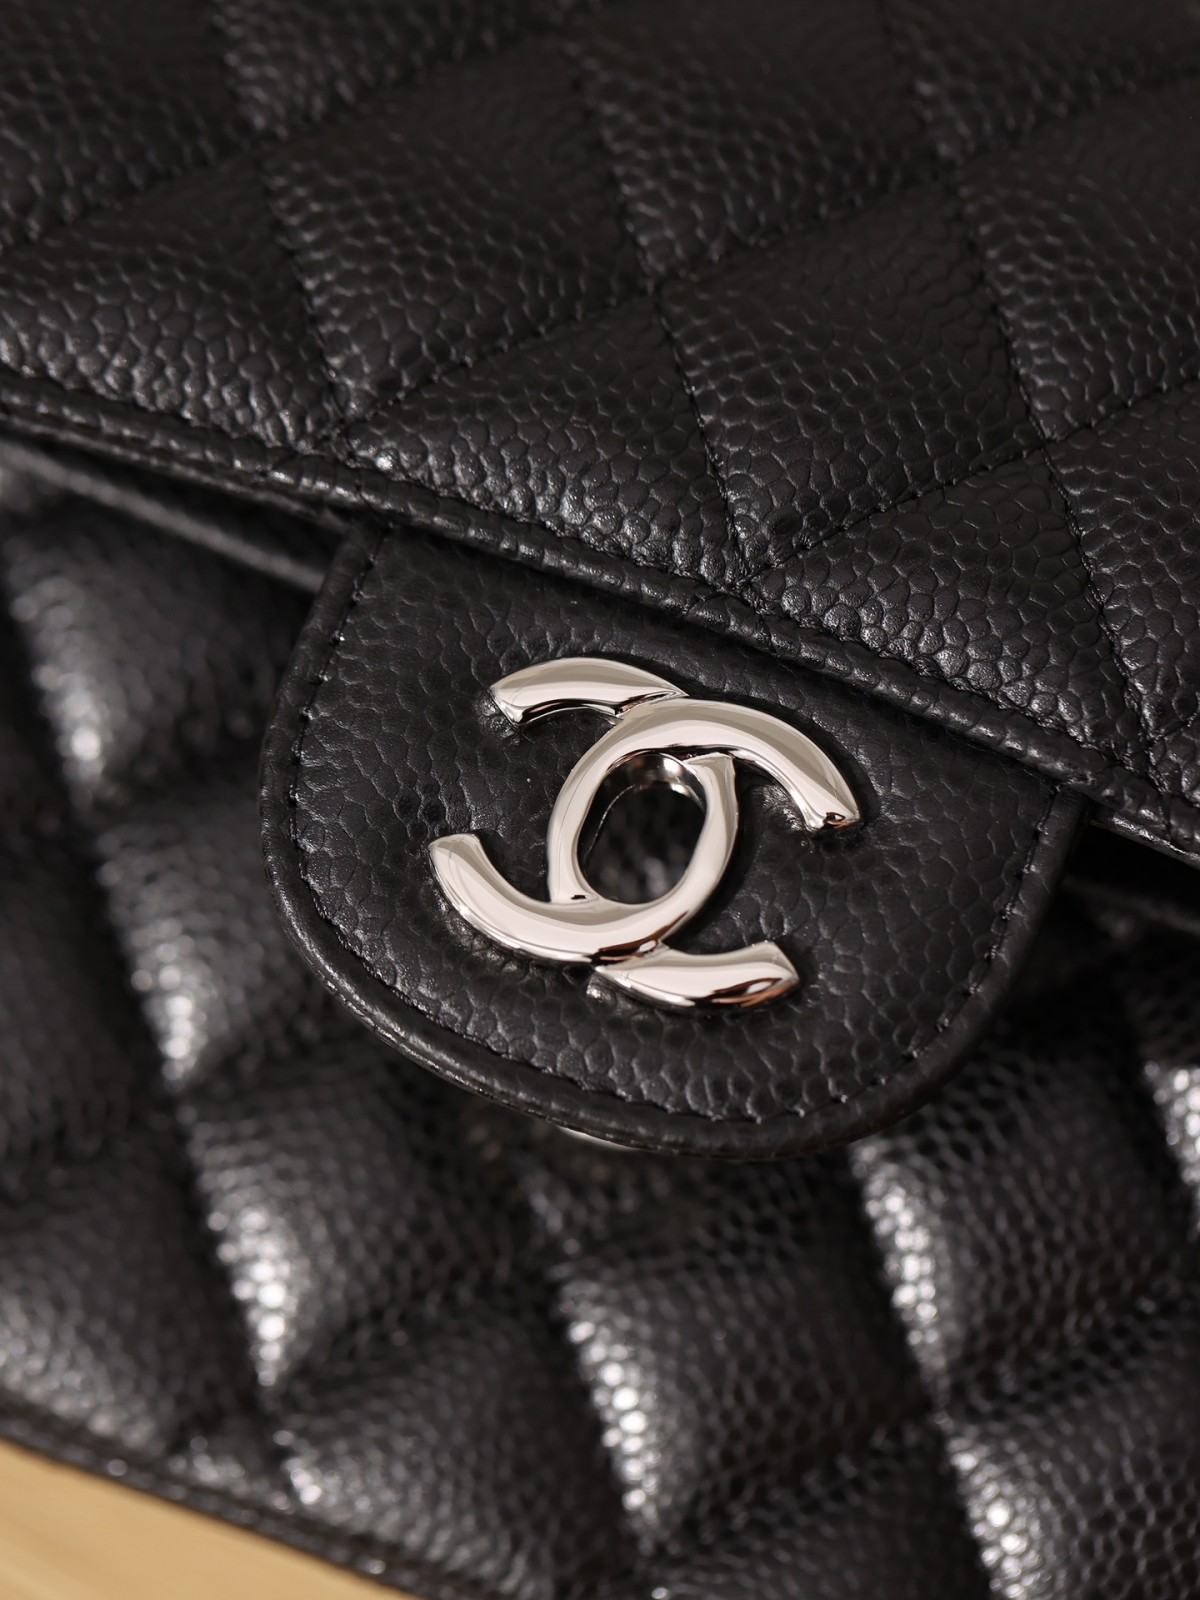 How good quality is a Shebag Chanel Classic Flap bag small size? (2023 updated)-最好的質量假路易威登包網上商店，複製設計師包 ru